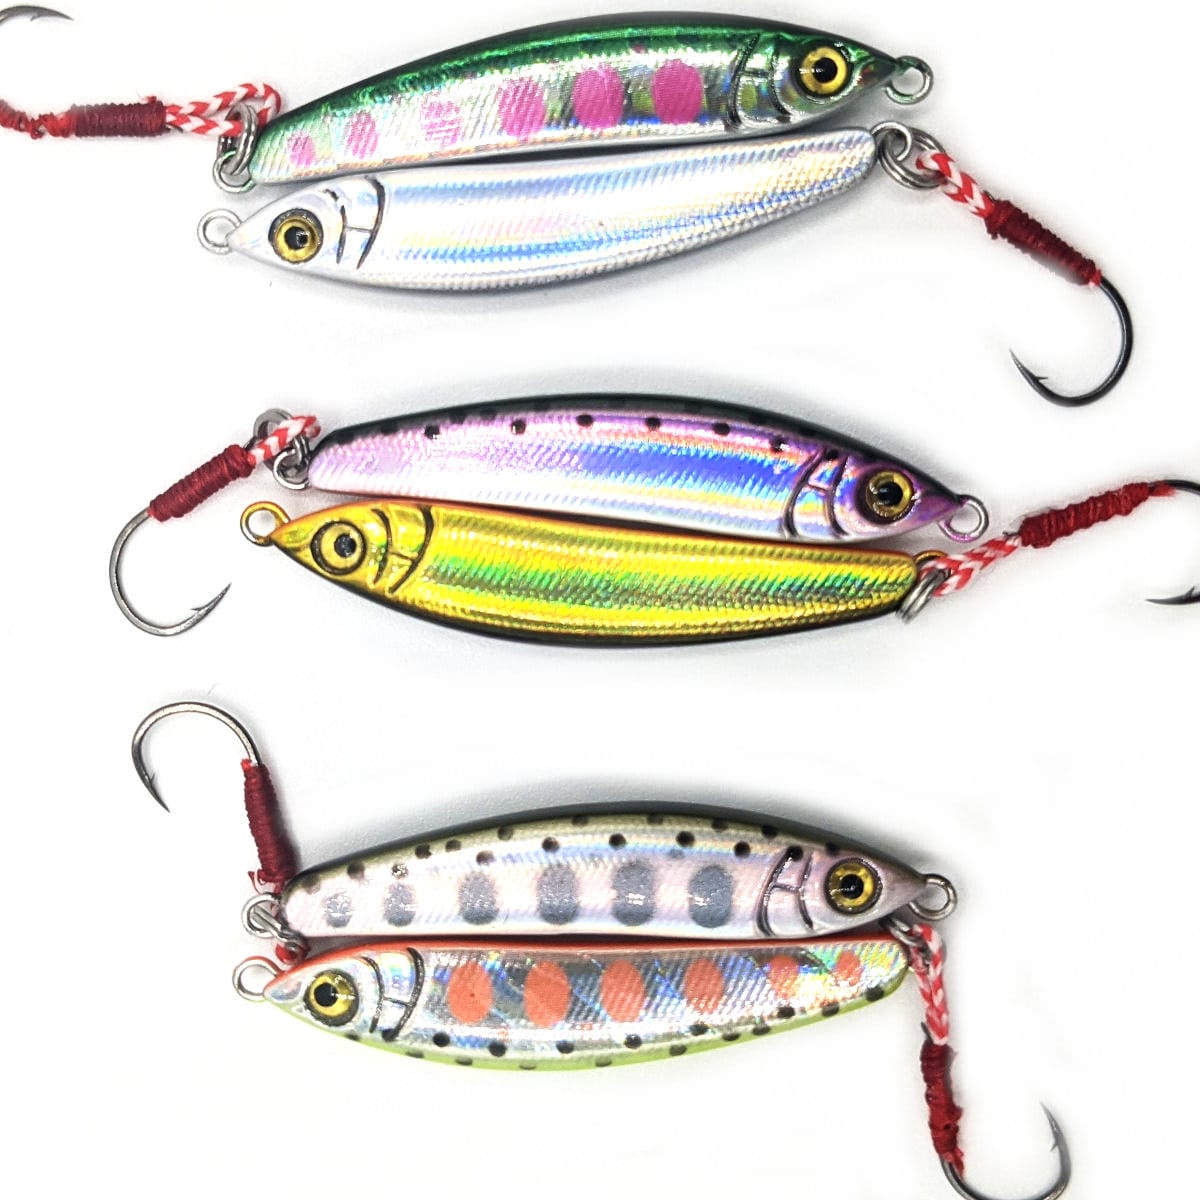 WANBY Fishing Lures Proven Explosive Color Special Minnow Swimbait  Vibrating Jigging Freshwater Saltwater Fishing Lures with Hook Fishing  Tackle for